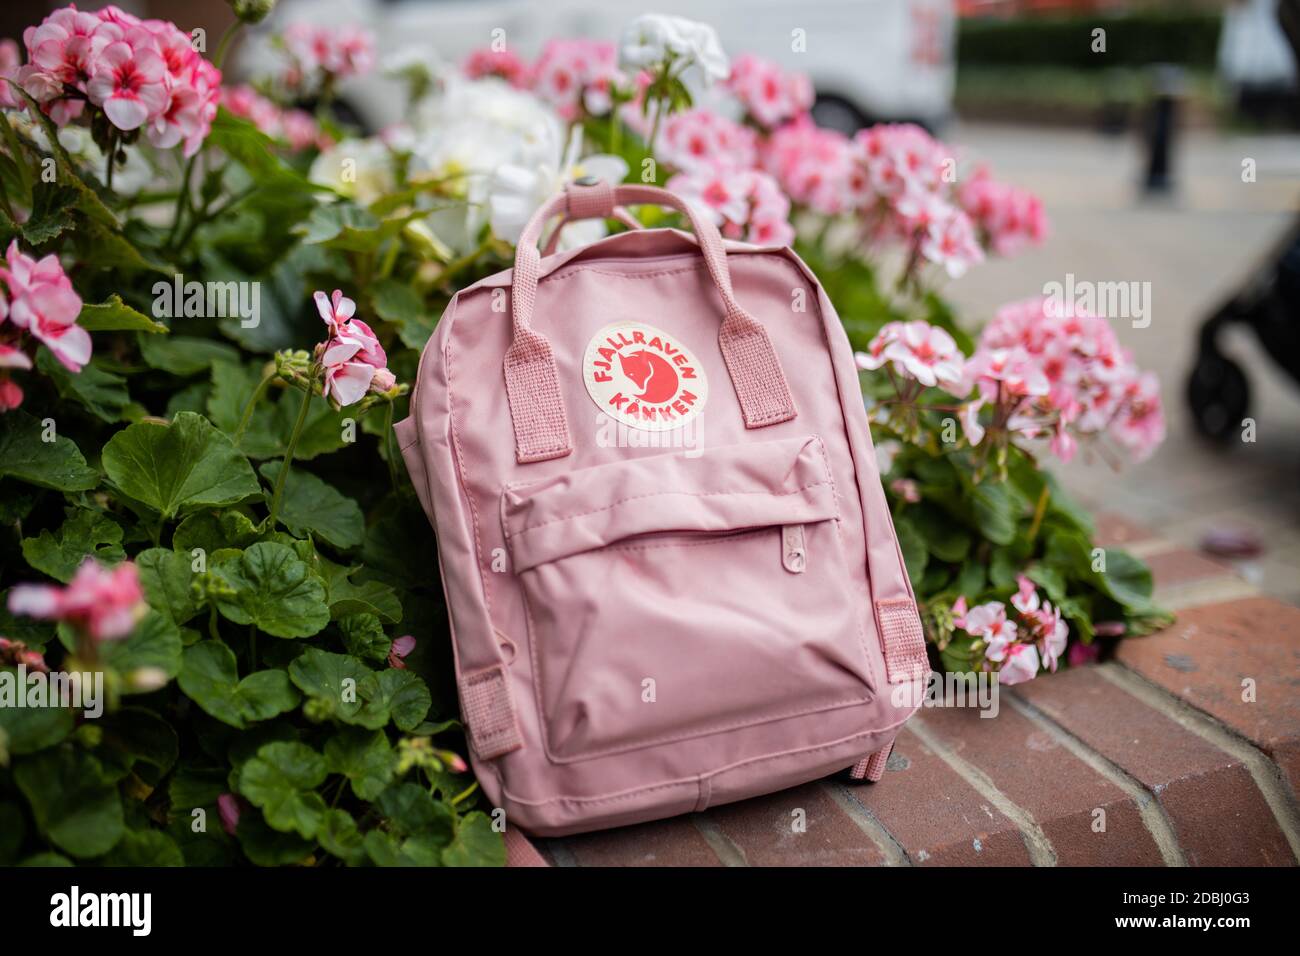 Pink backpack on a brick planter with plants and pink flowers Stock Photo